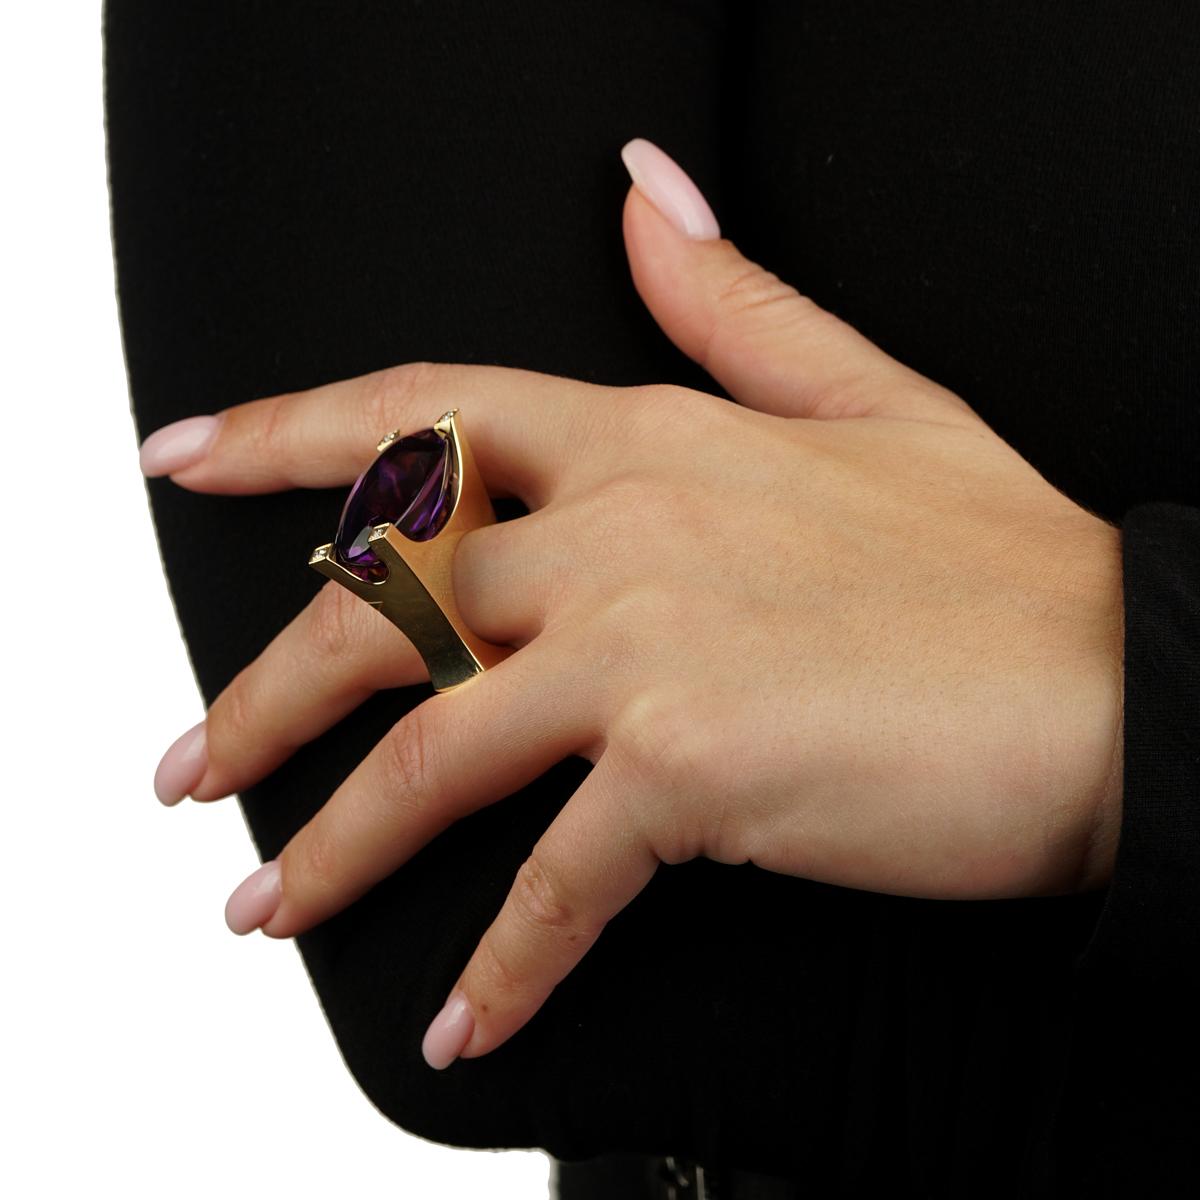 A fabulous Van Cleef and Arpels cocktail ring featuring a vivid amethyst encased by 4 of the finest Van Cleef and Arpels round brilliant cut diamonds in 18k yellow gold. The ring measures a size 6 1/4

Weight : 45.8 grams
